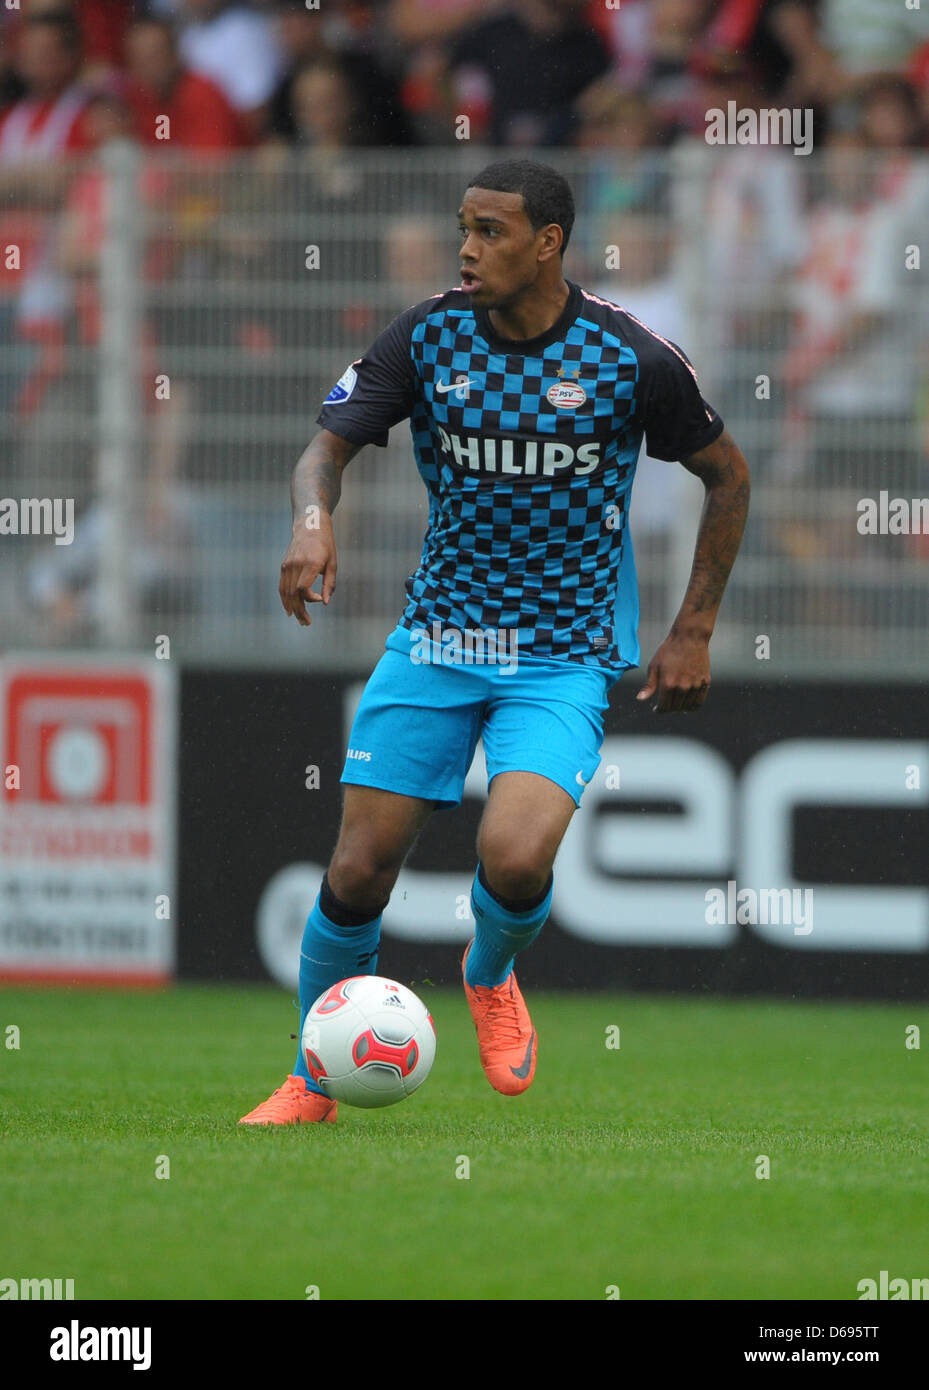 Eindhoven's Memphis Depay plays the ball during the soccer test match between 1. FC Union Berlin and PSV Eindhoven at the Stadium Alte Foersterei in Berlin, Germany, 29 July 2012. The match ended 1-1 undecided. Photo: Soeren Stache Stock Photo